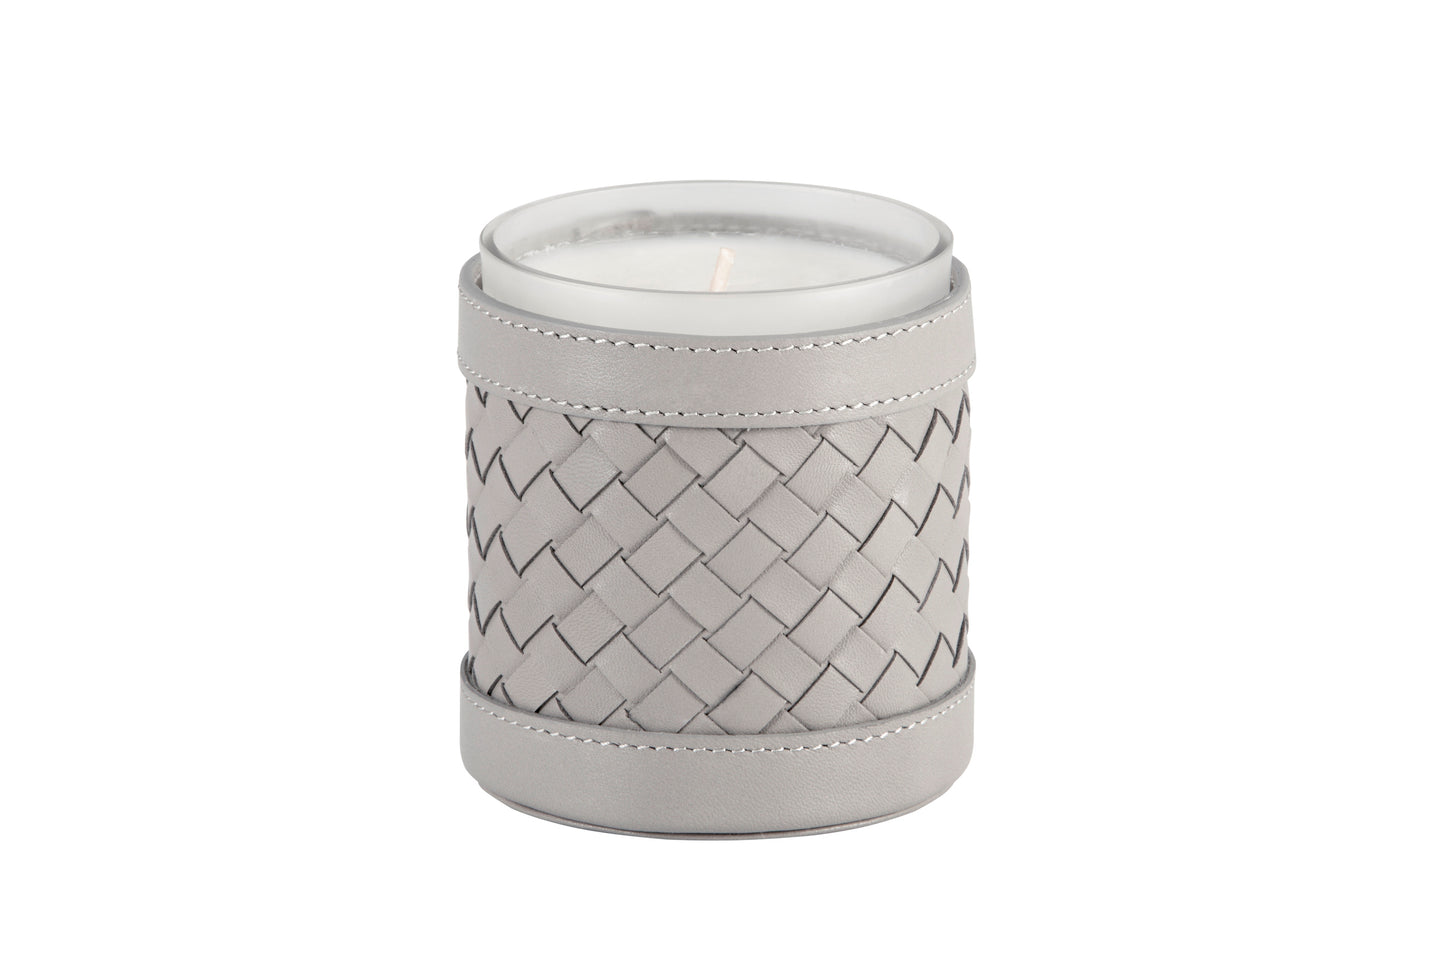 Riviere Ester Handwoven Leather Candle Holder With Removable Scented Candle | Exquisite Handwoven Leather Design | Enhance Your Home Ambiance with a Removable Scented Candle | Elevate Your Decor with Riviere's Luxurious Accessories | Available at 2Jour Concierge, #1 luxury high-end gift & lifestyle shop